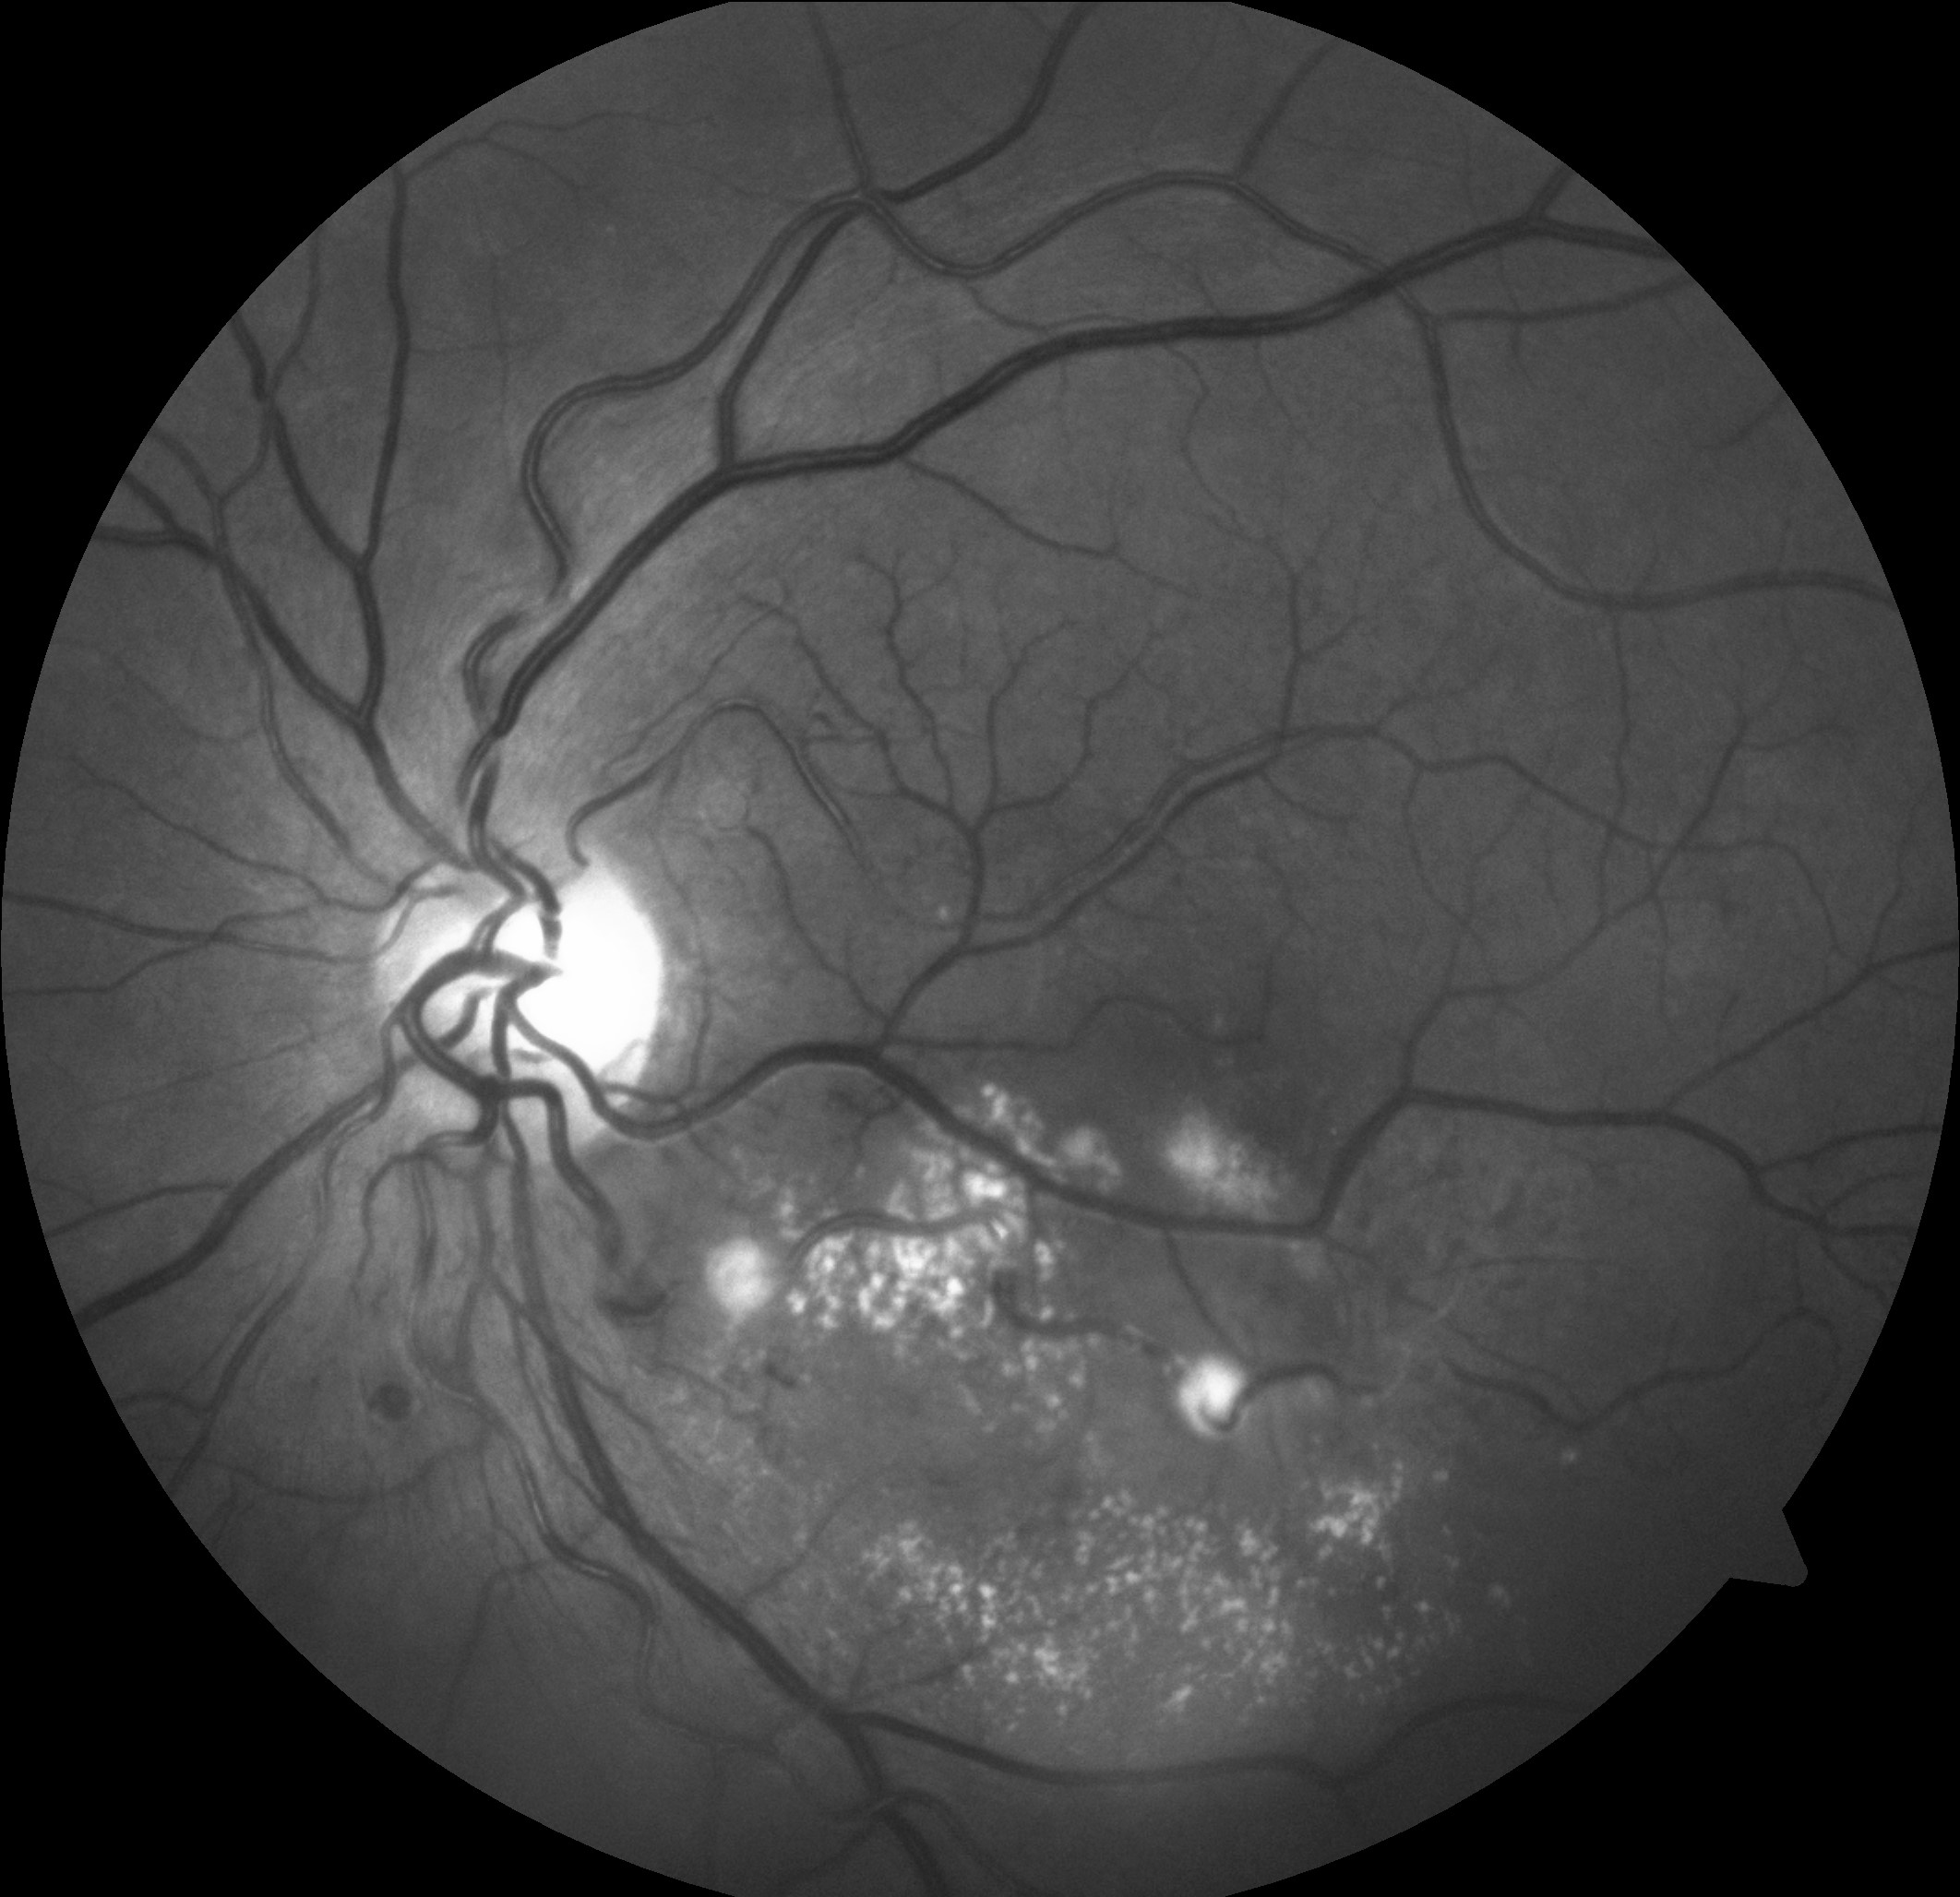 A 63-year-old male presented with acute-onset central vision loss in the left eye secondary to a ruptured retinal arterial macroaneurysm. The characteristic layers of subretinal, intraretinal and preretinal hemorrhages resorbed within three months to reveal underlying exudates, sclerotic vessels and the fibrosed aneurysm. Two additional macroaneurysms, one of which is also fibrosed, are visible in the proximal portion of the inferotemporal arcade.